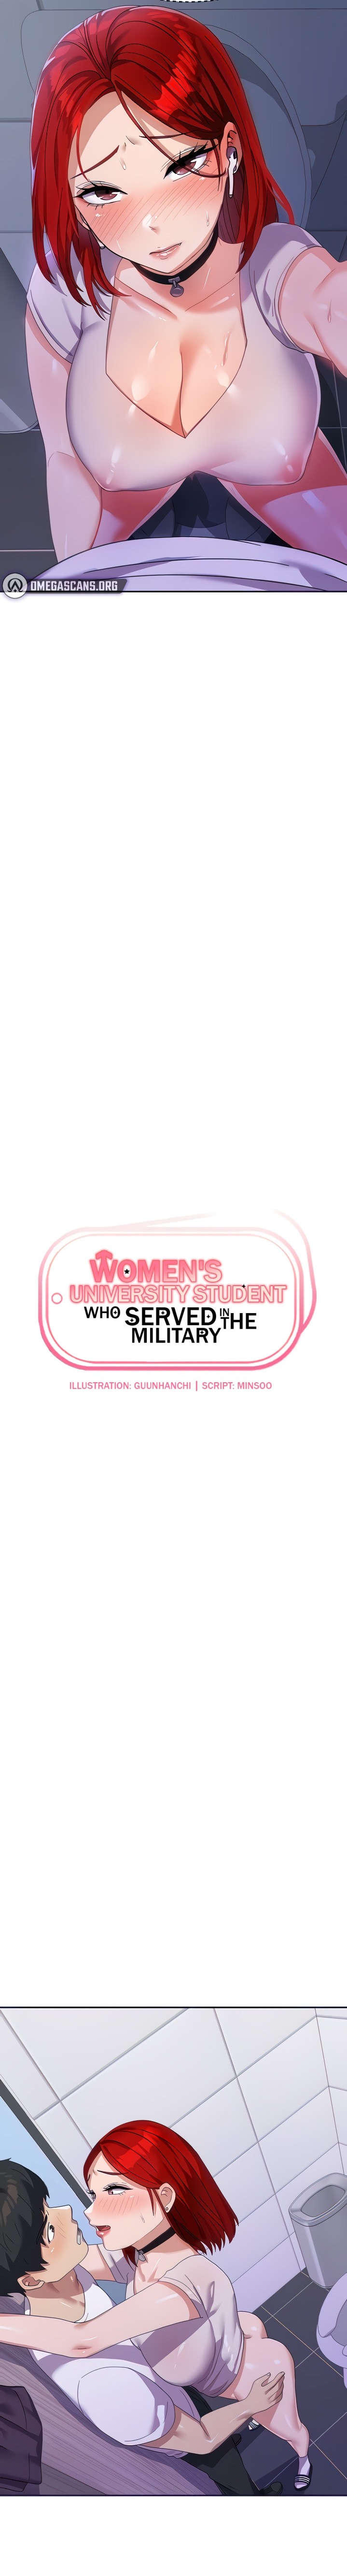 Women’s University Student who Served in the Military - Chapter 12 Page 3